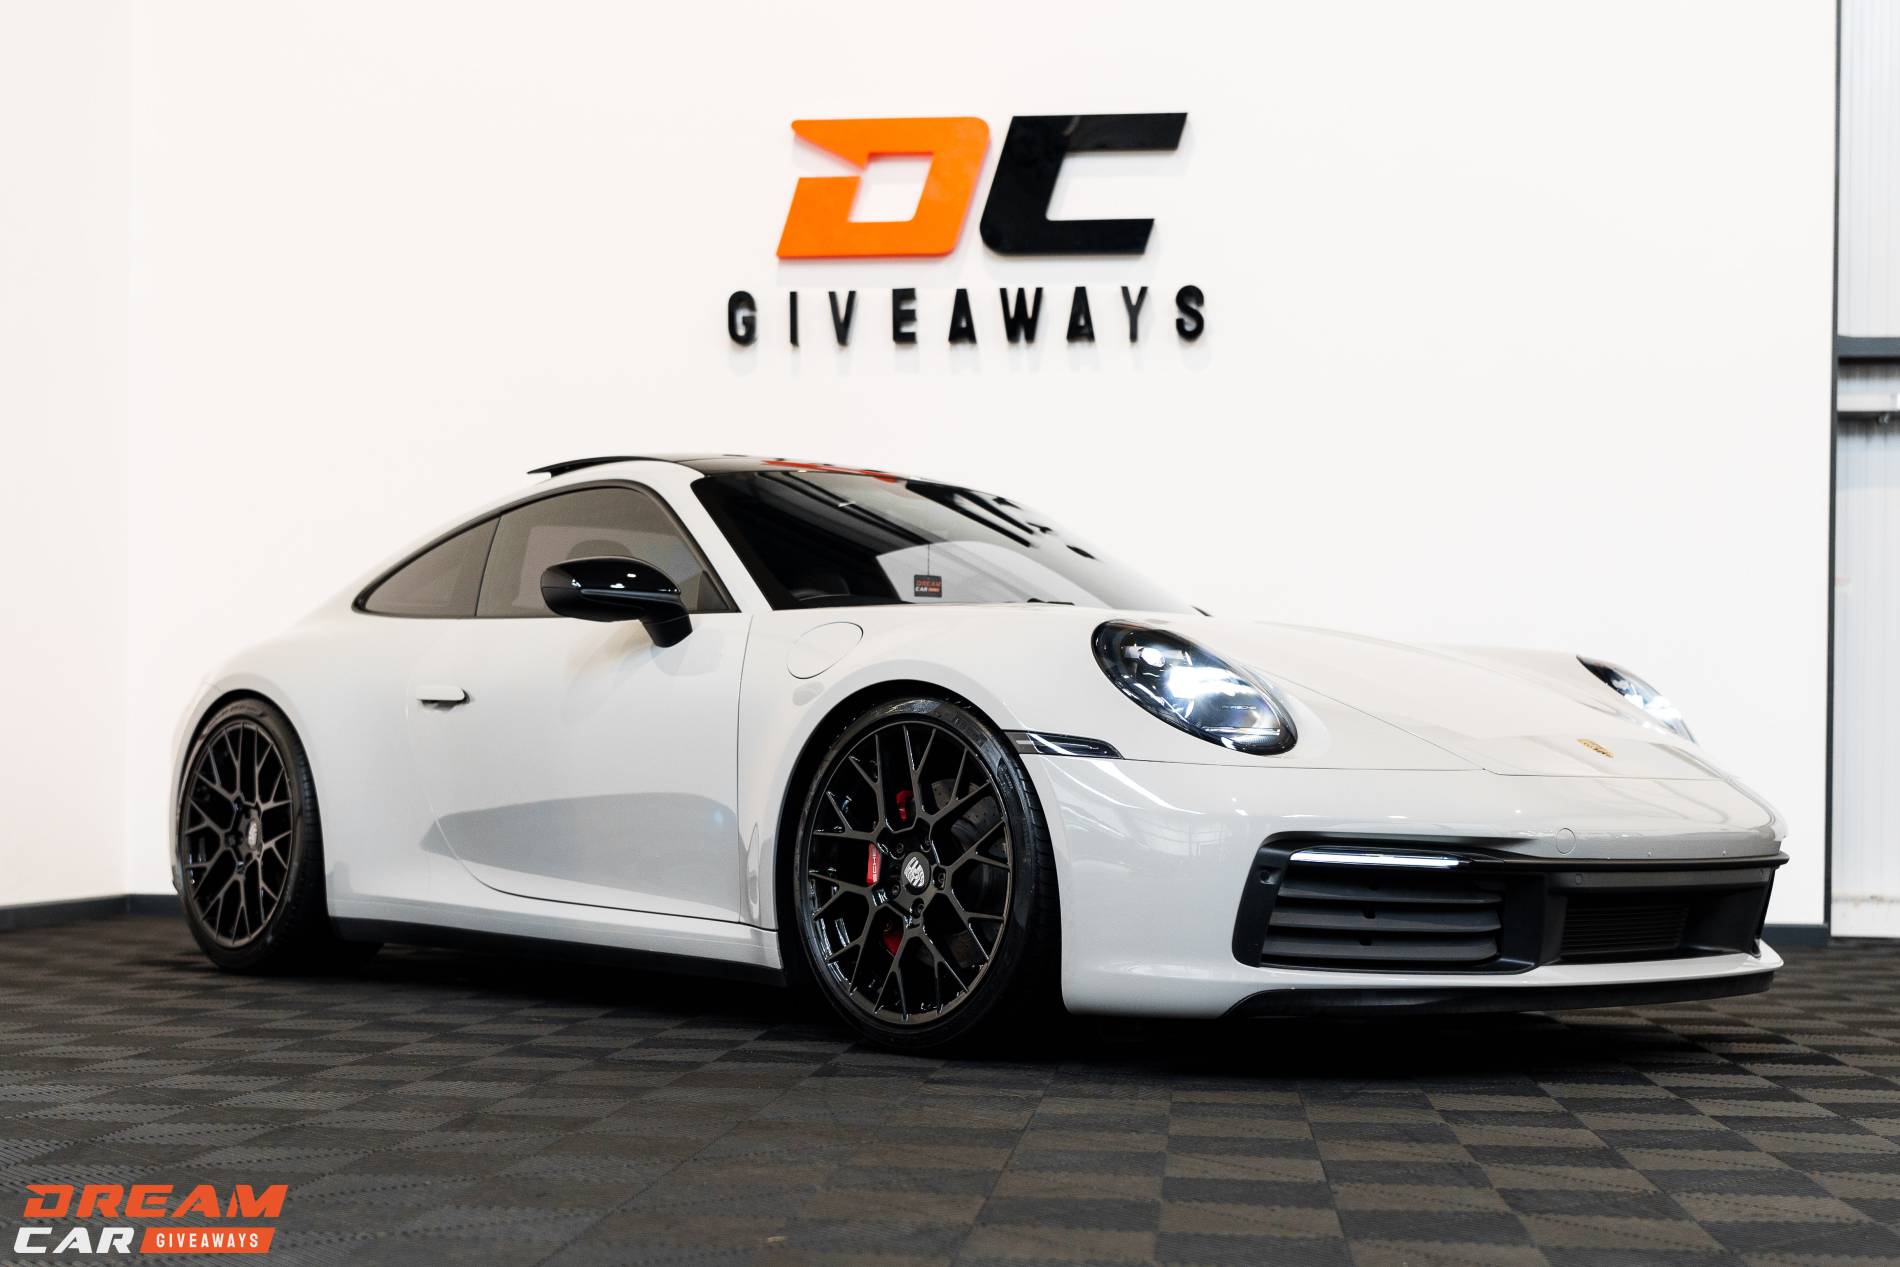 Win This Porsche 911 C4S & £2,000 or £70,000 Tax Free